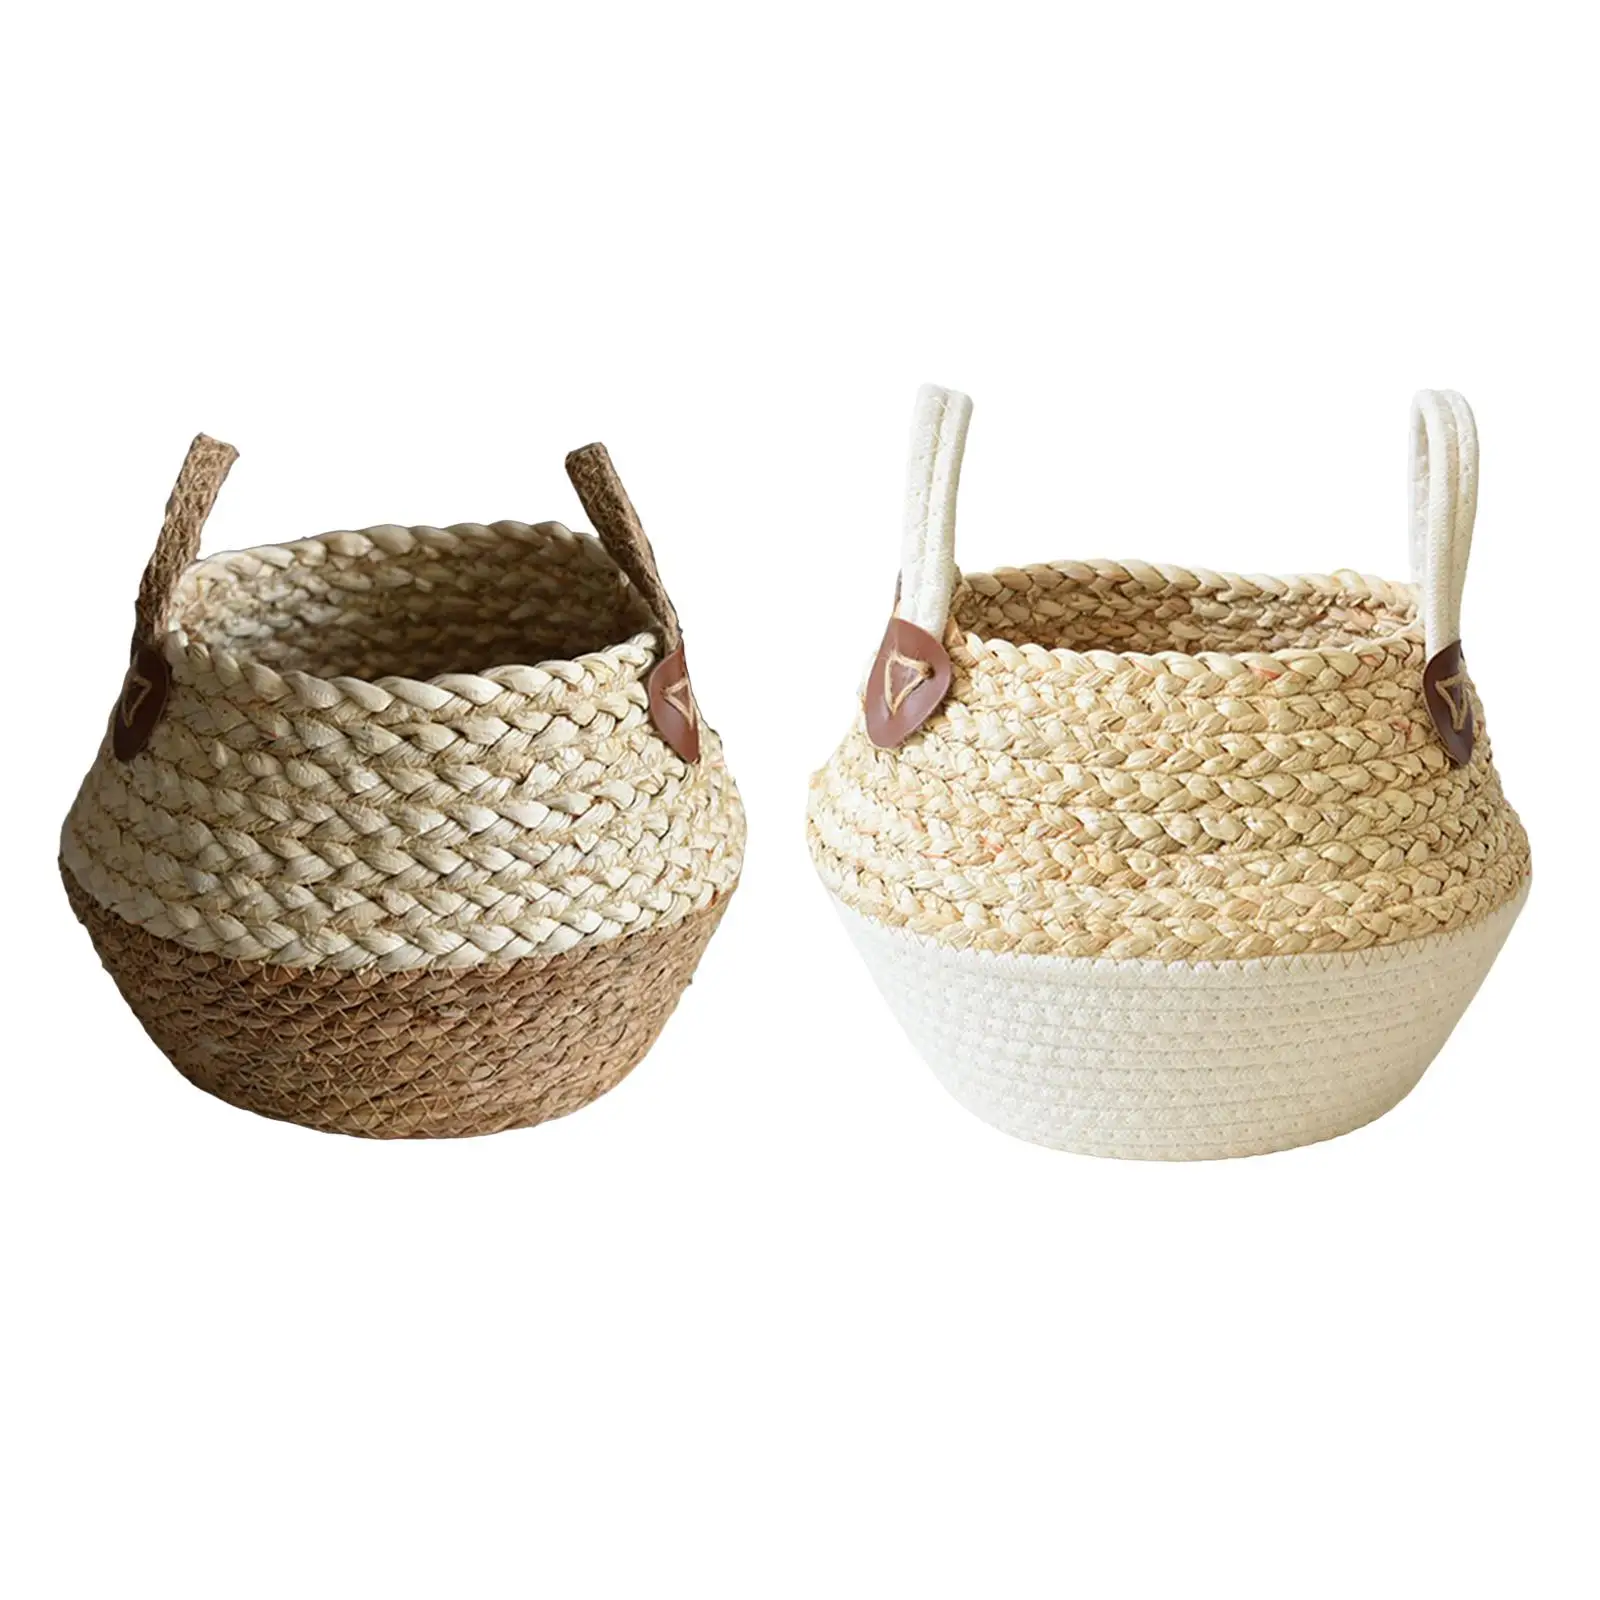 Woven Basket with Handle Dirty Clothes Laundry Basket Toys Organizer Bin Flower Pot Basket for Bedroom Closet Bathroom Laundry